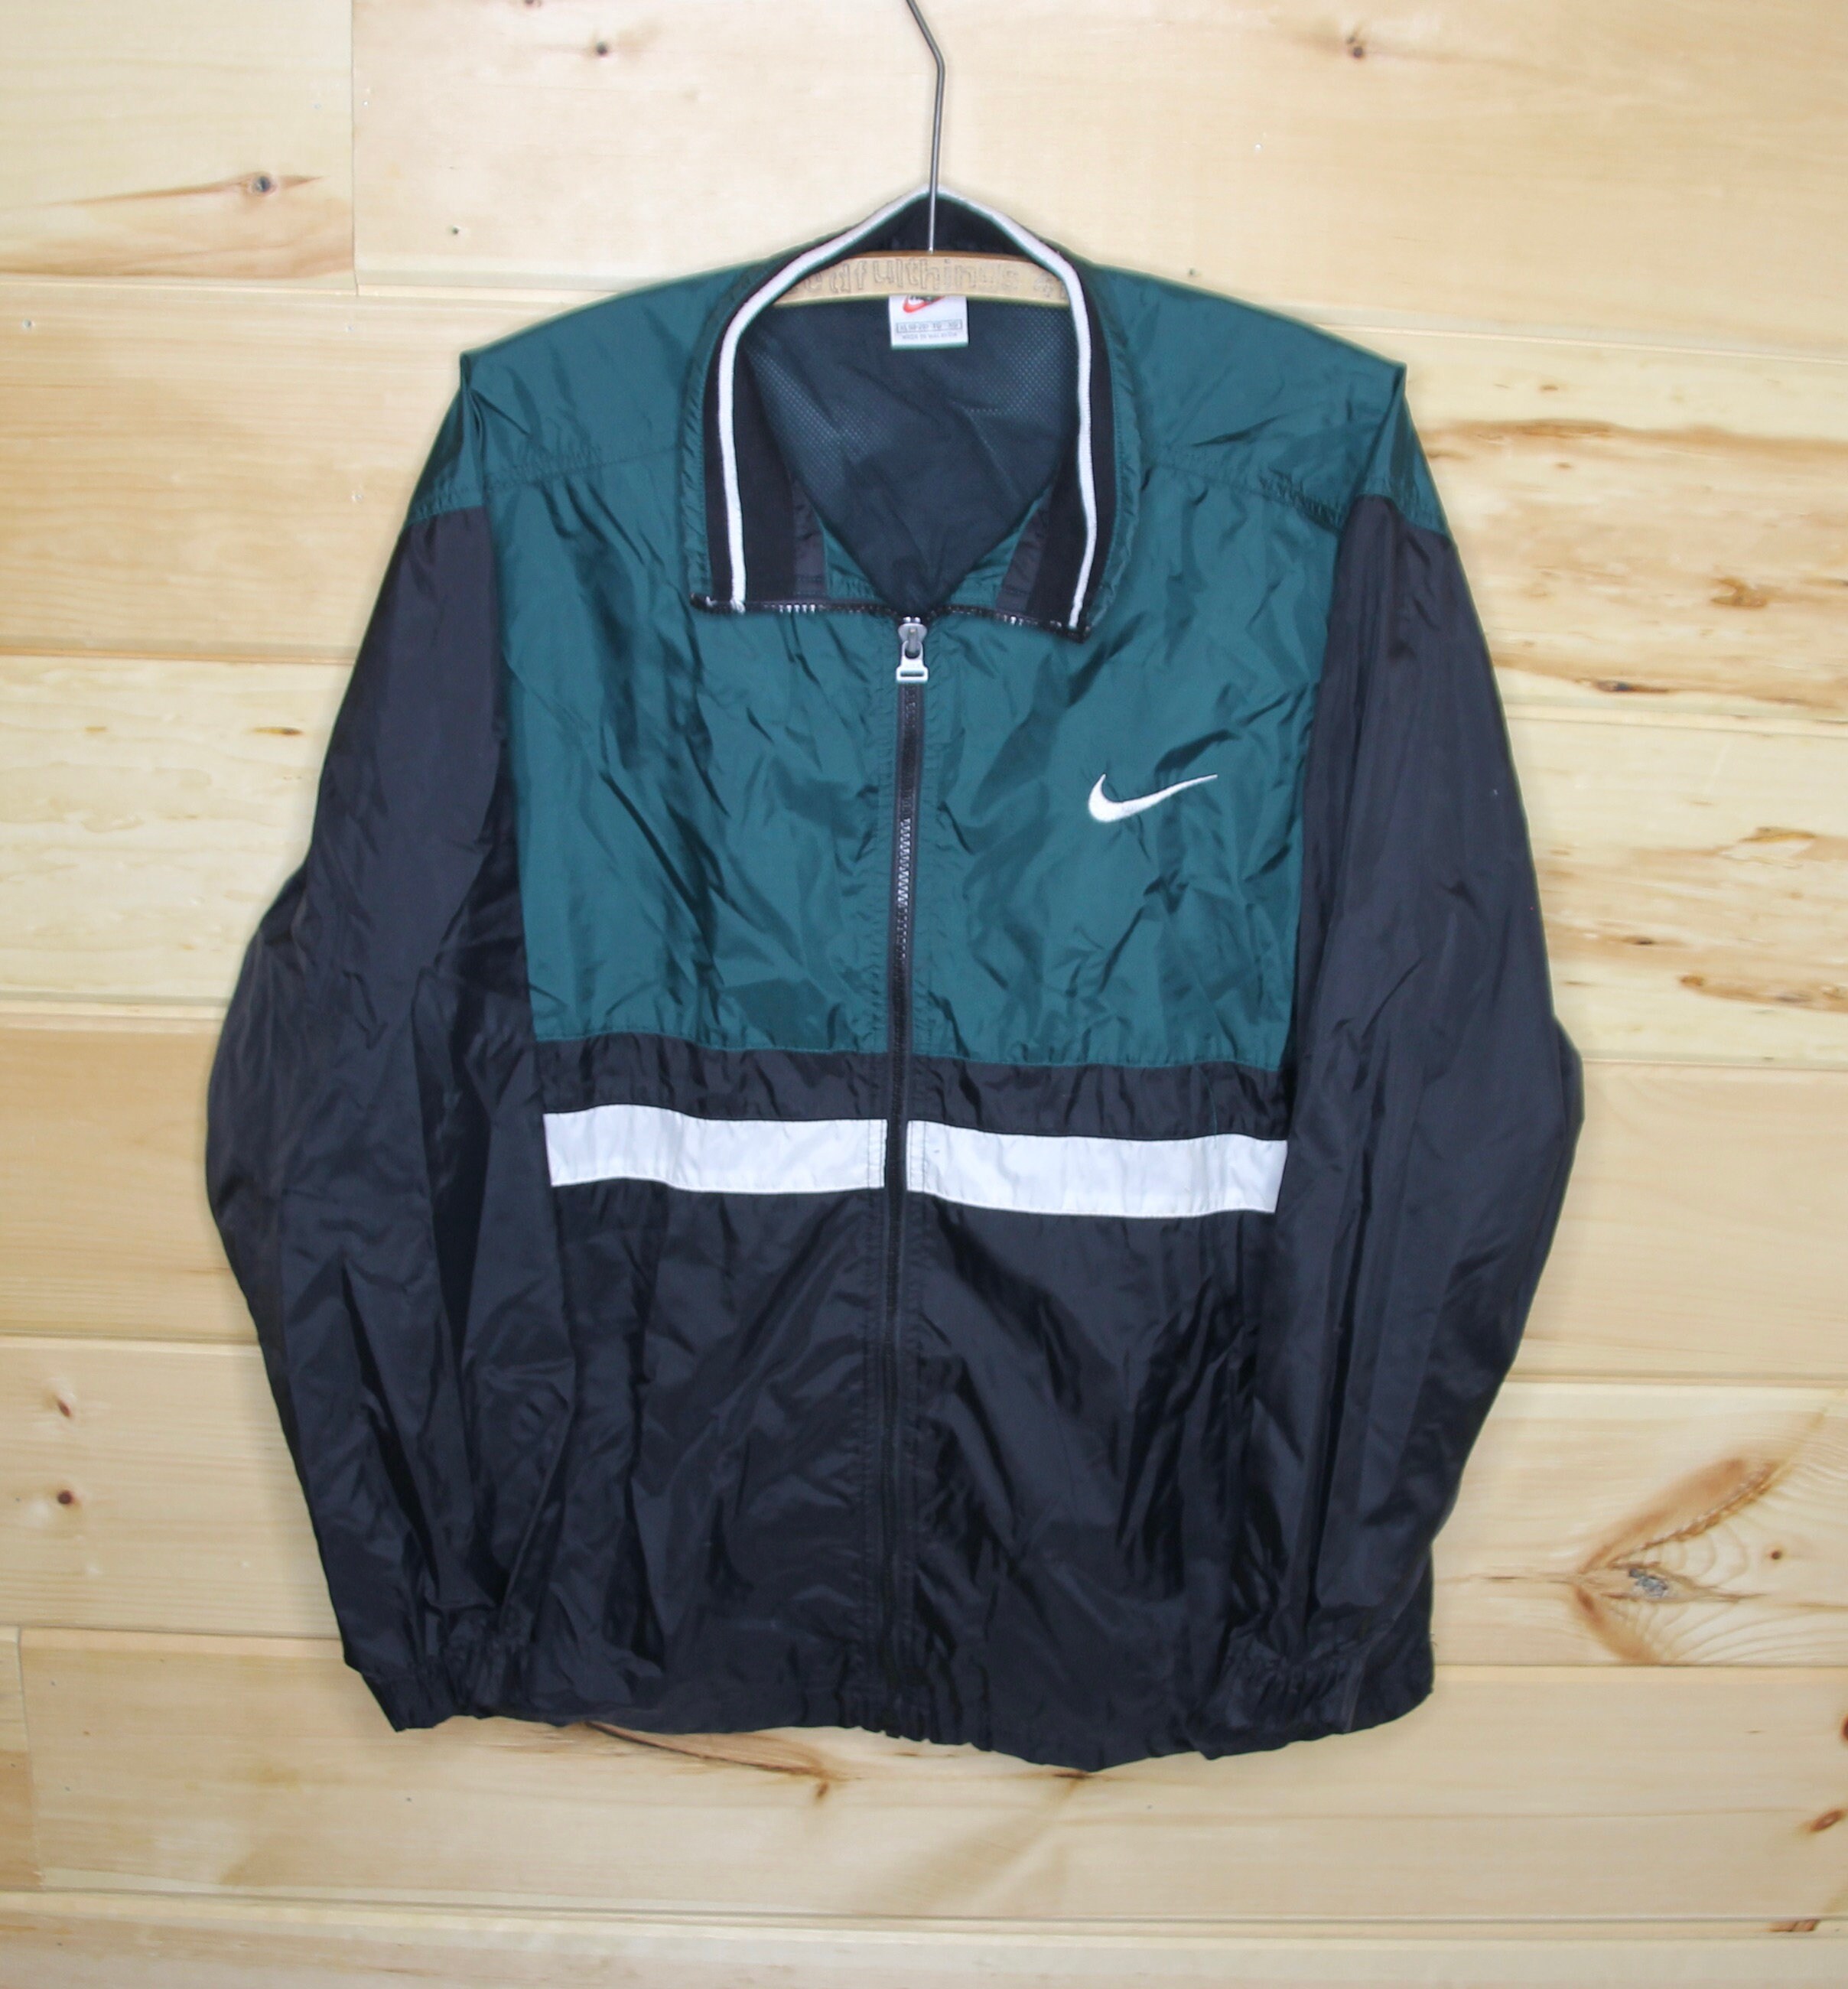 Perch Decoration Applied Nike Windbreaker Black and White - Etsy